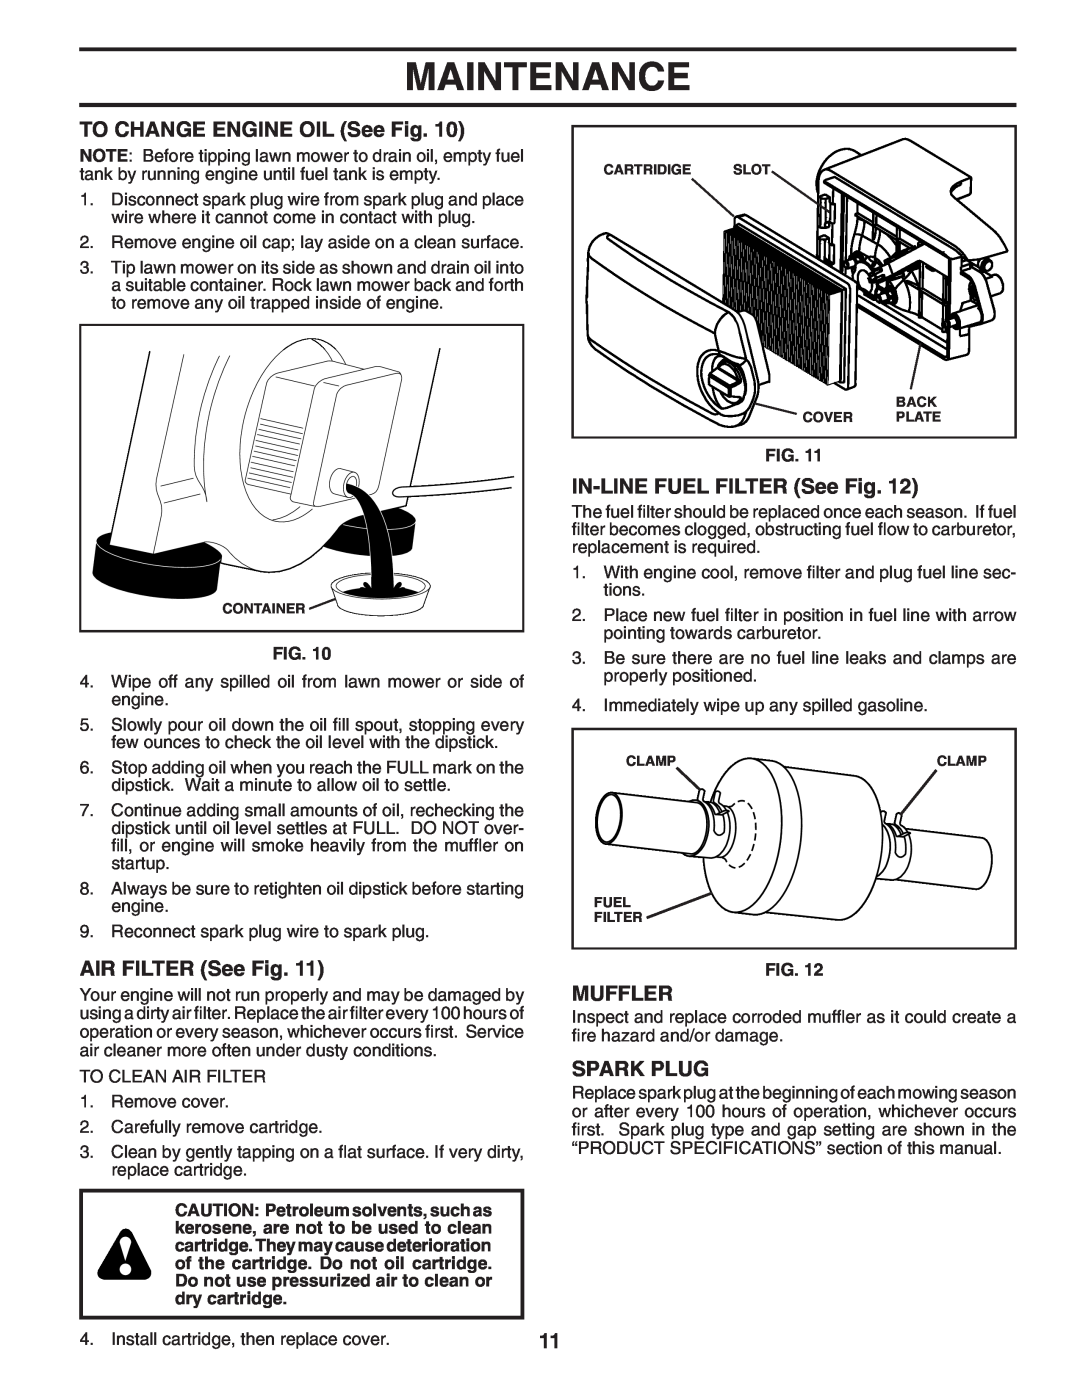 Husqvarna 6021P manual TO CHANGE ENGINE OIL See Fig, IN-LINE FUEL FILTER See Fig, AIR FILTER See Fig, Muffler, Spark Plug 